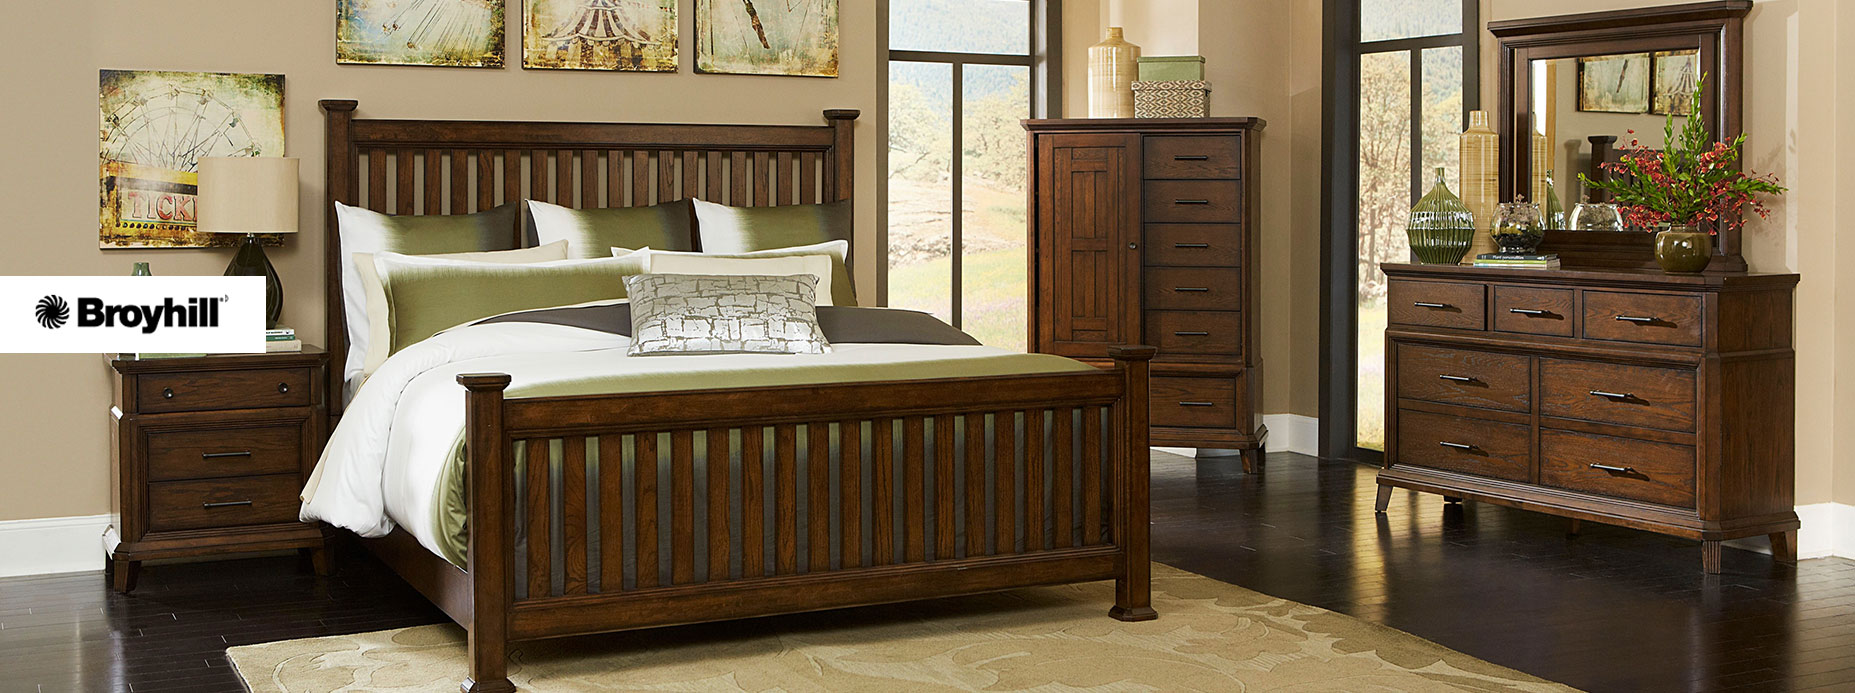 Broyhill Furniture Brand Bought By Big Lots Woodworking Network